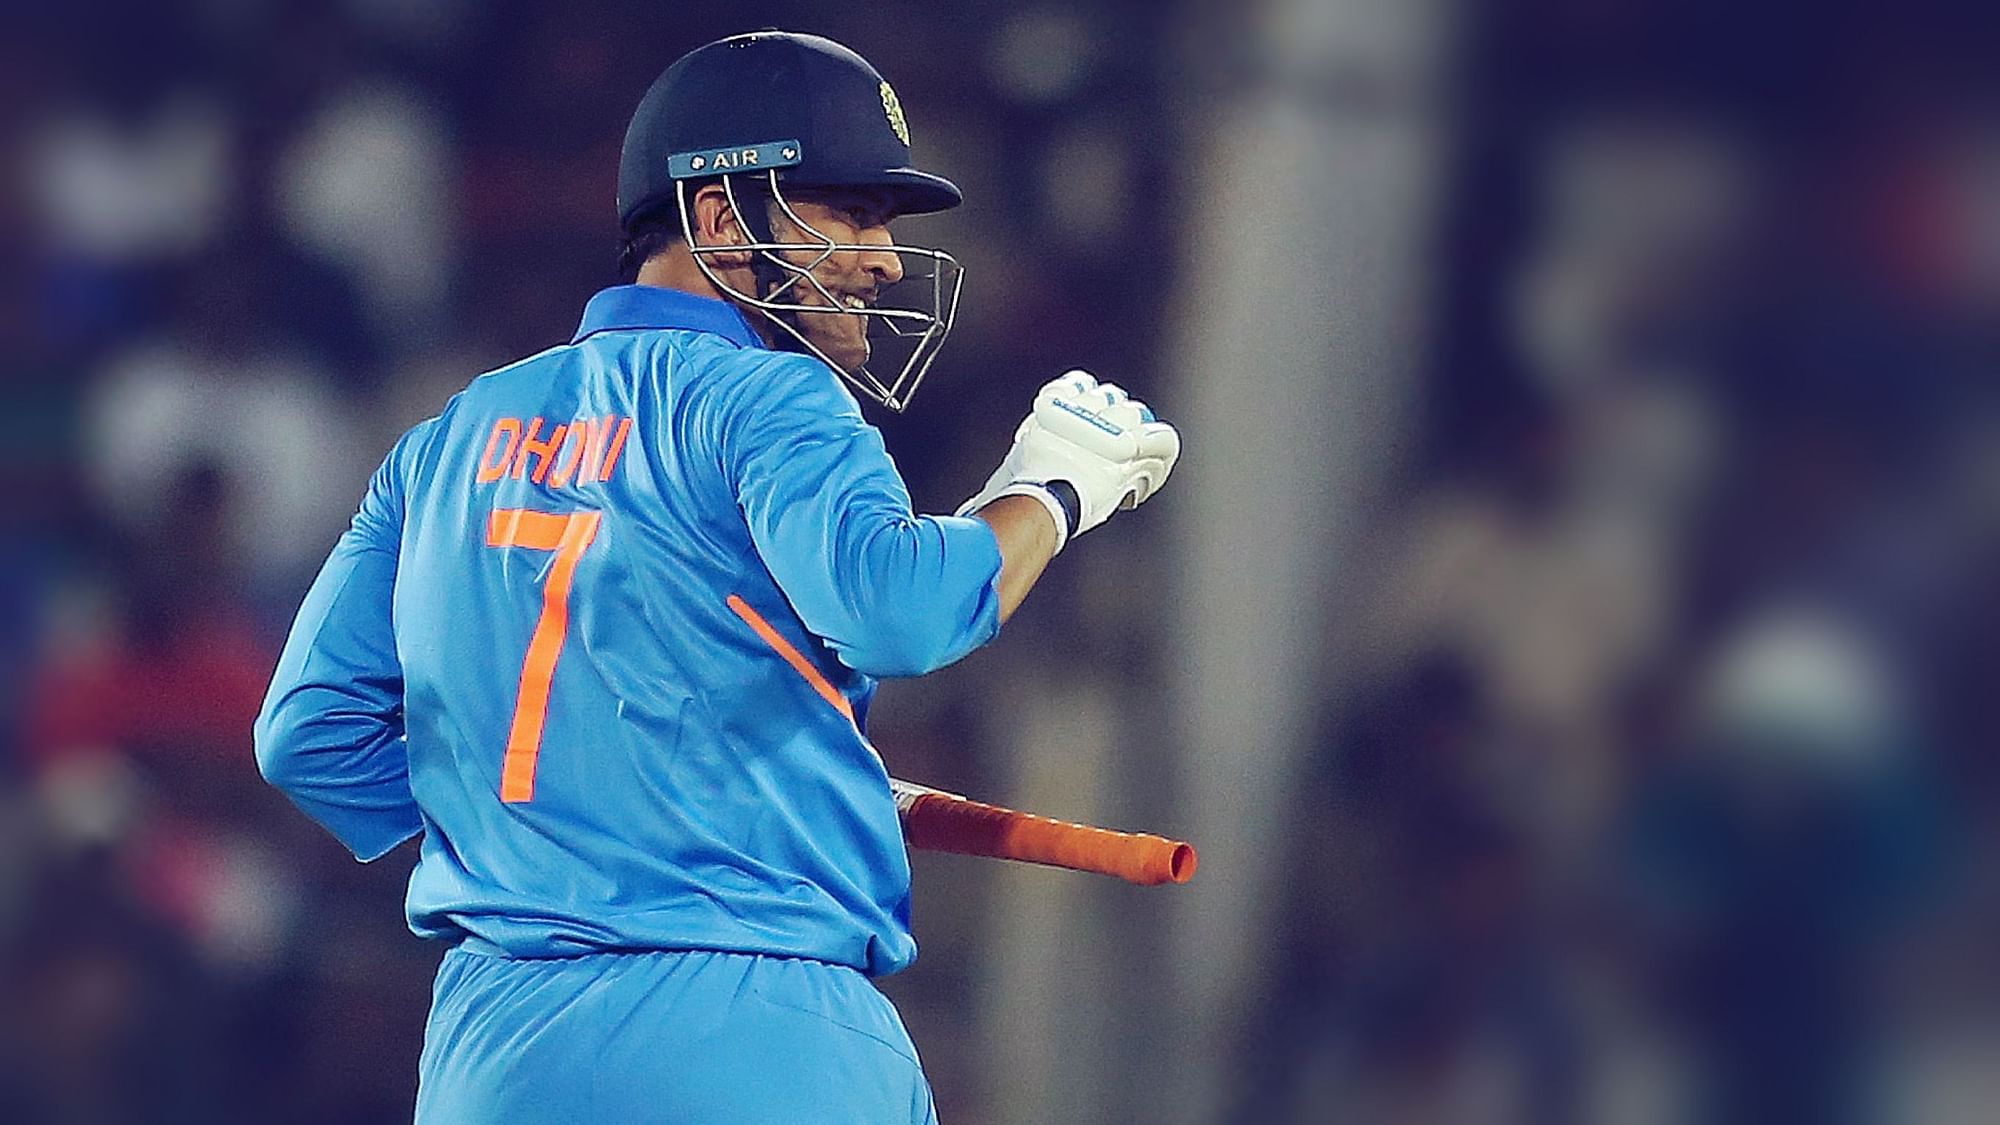 In his last four ODI innings against Australia MS Dhoni scored 51, 55 not out, 87 not out and 59 not out.